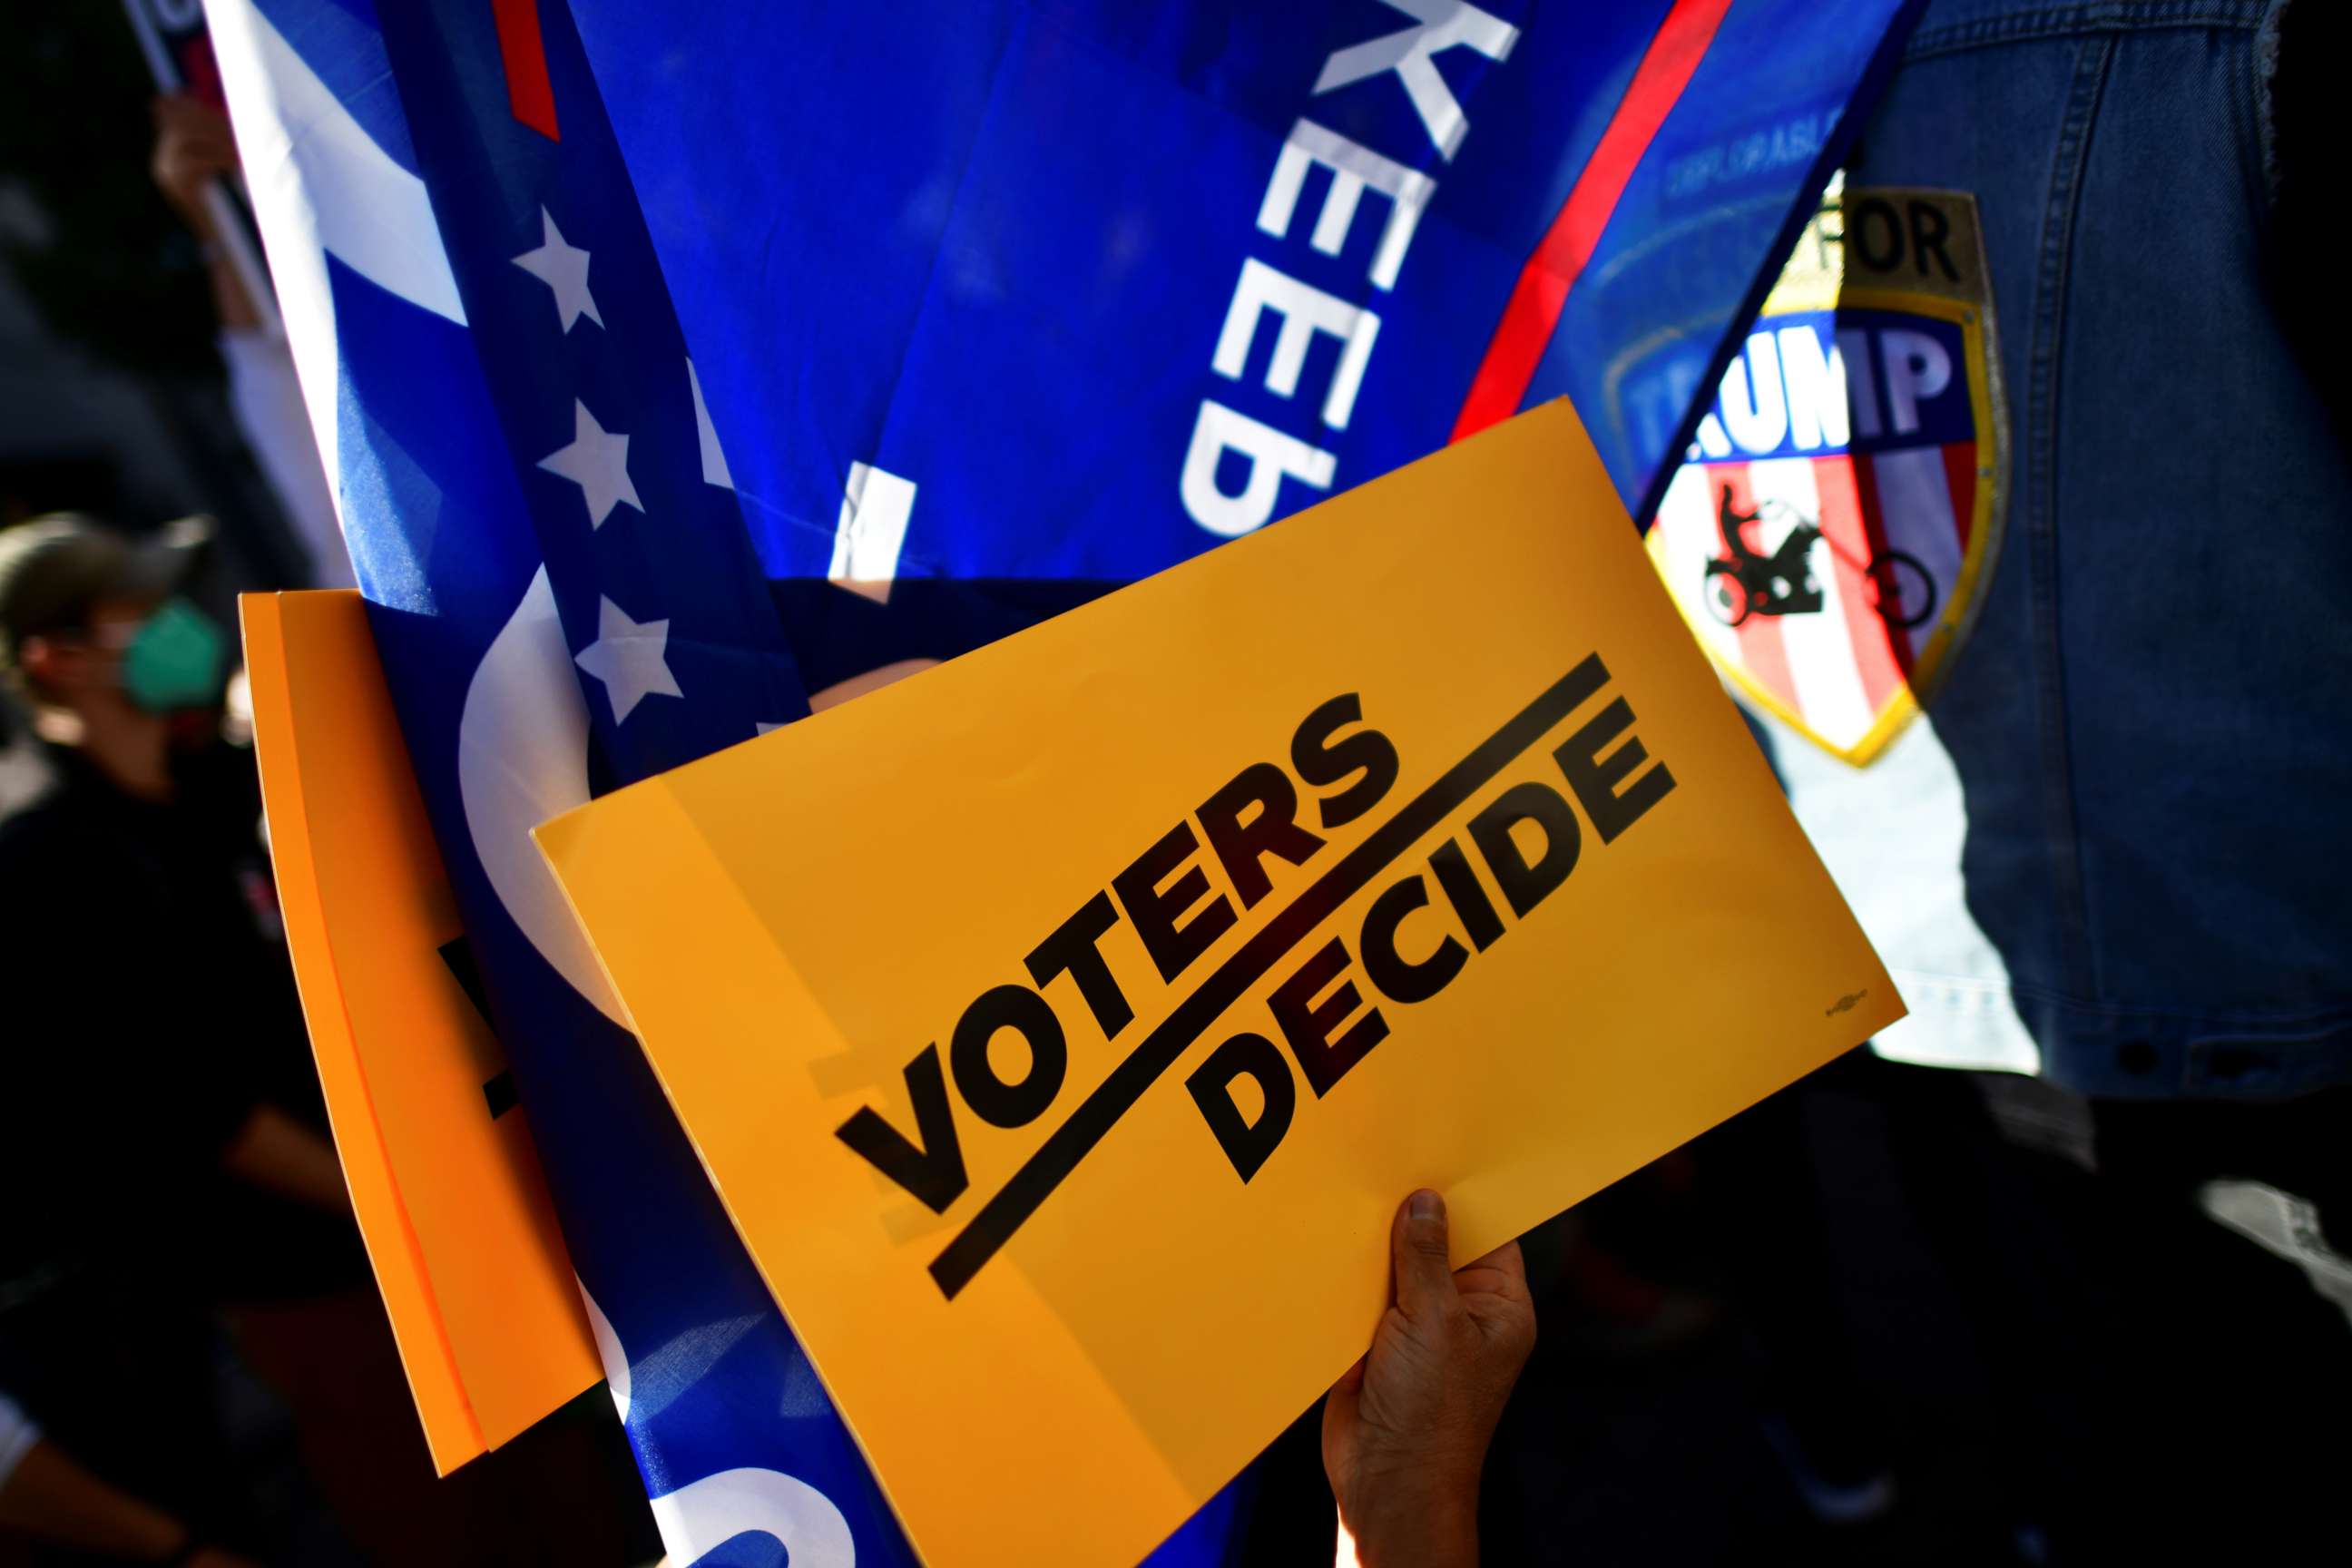 PHOTO: A "Voters Decide" sign is pictured as people demonstrate outside of the Philadelphia Convention Center, where votes are still being counted two days after the 2020 U.S. presidential election, in Philadelphia, Pennsylvania.